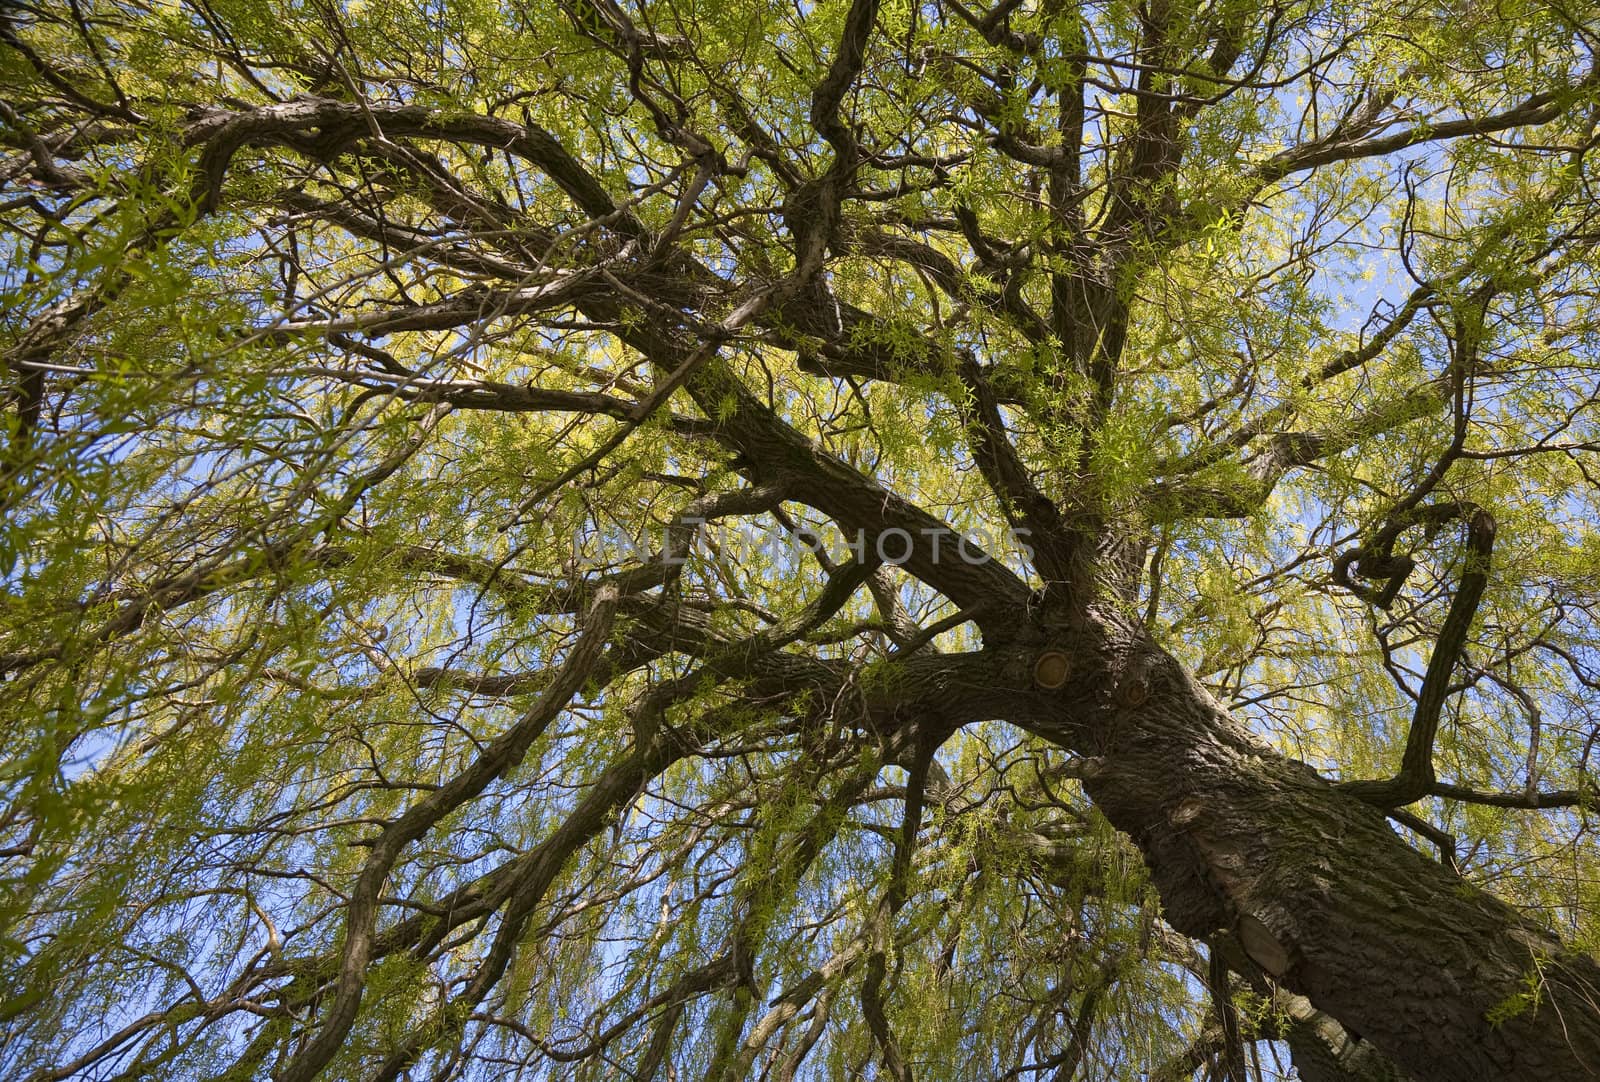 Treetop of an old willow in the park at springtime - Denmark.